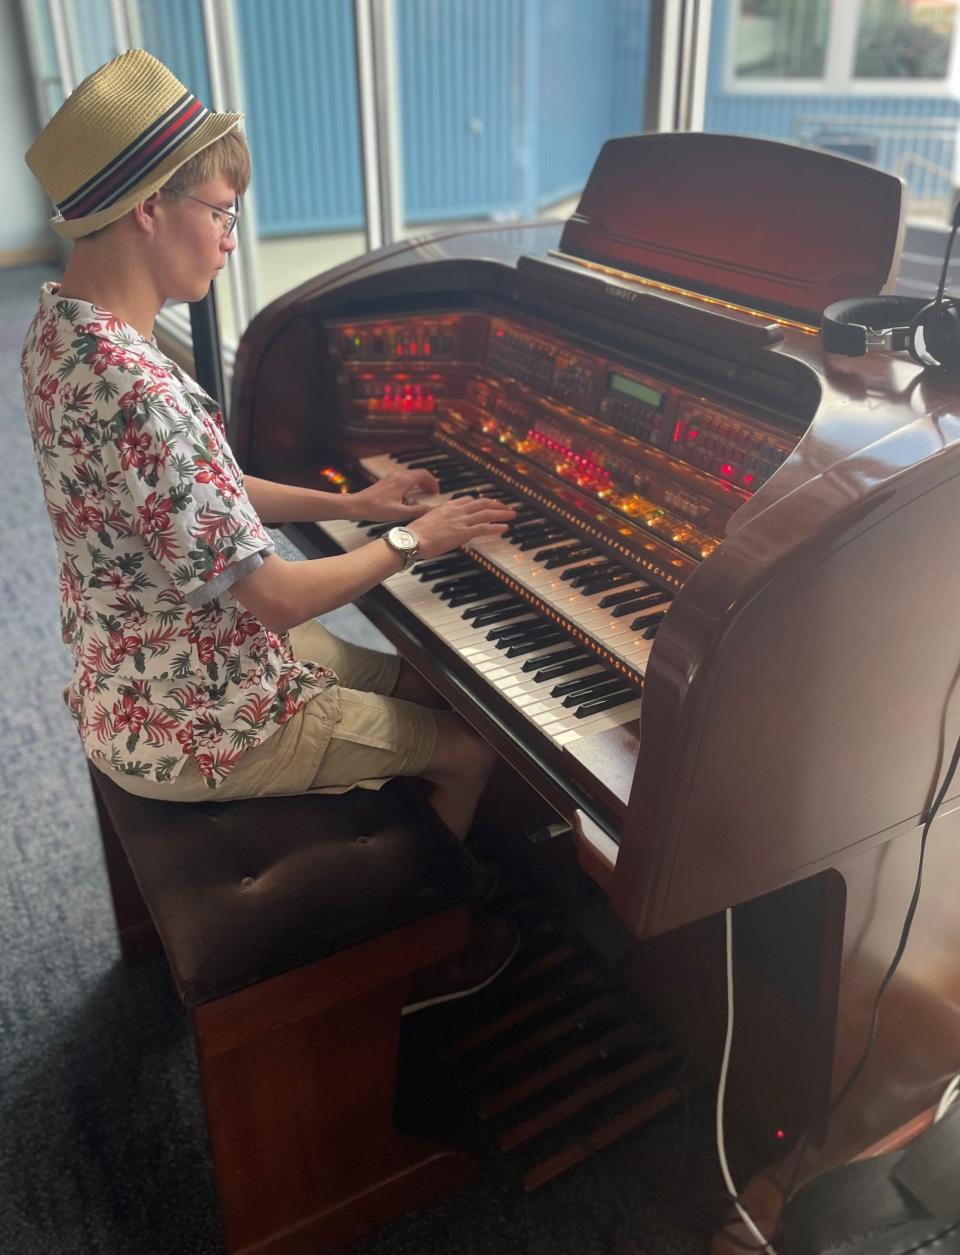 Will Cudmore, a 15-year-old from Northbridge, plays the organ Wednesday at Polar Park, as part of an audition to play the instrument at a WooSox game later this season.